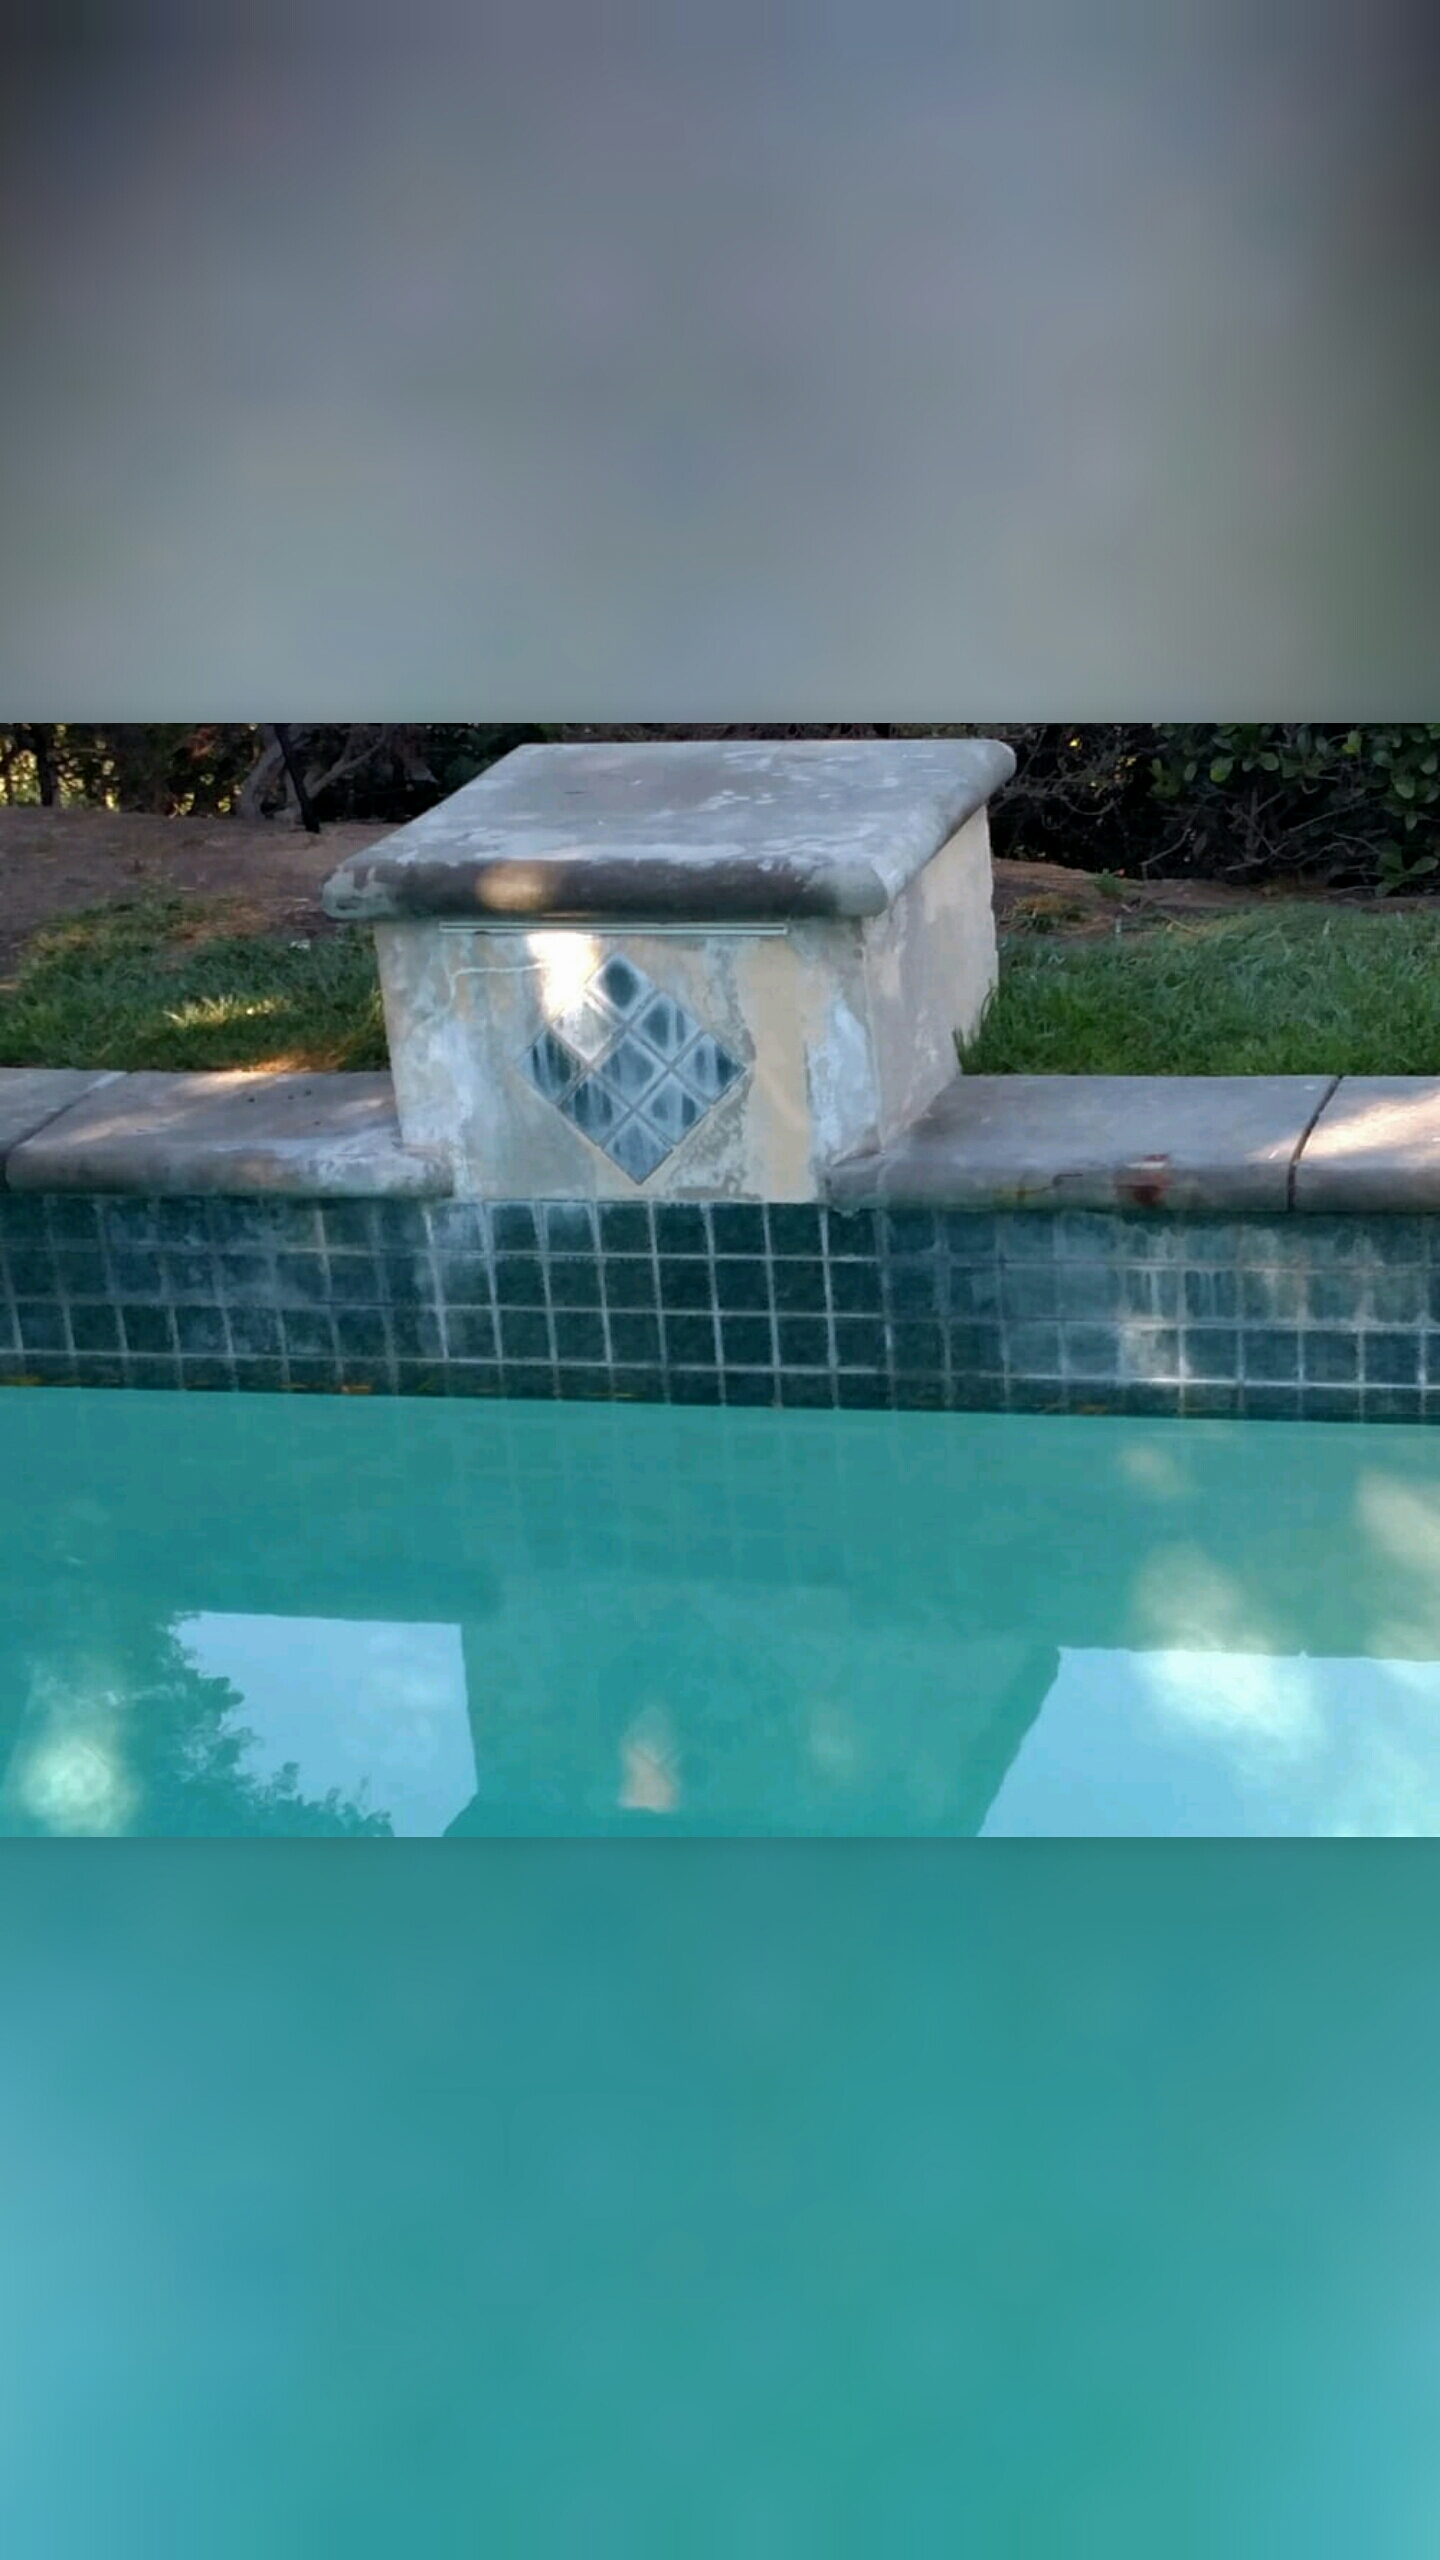 How to Remove Pollen from Your Swimming Pool Quickly? - Pool Tile